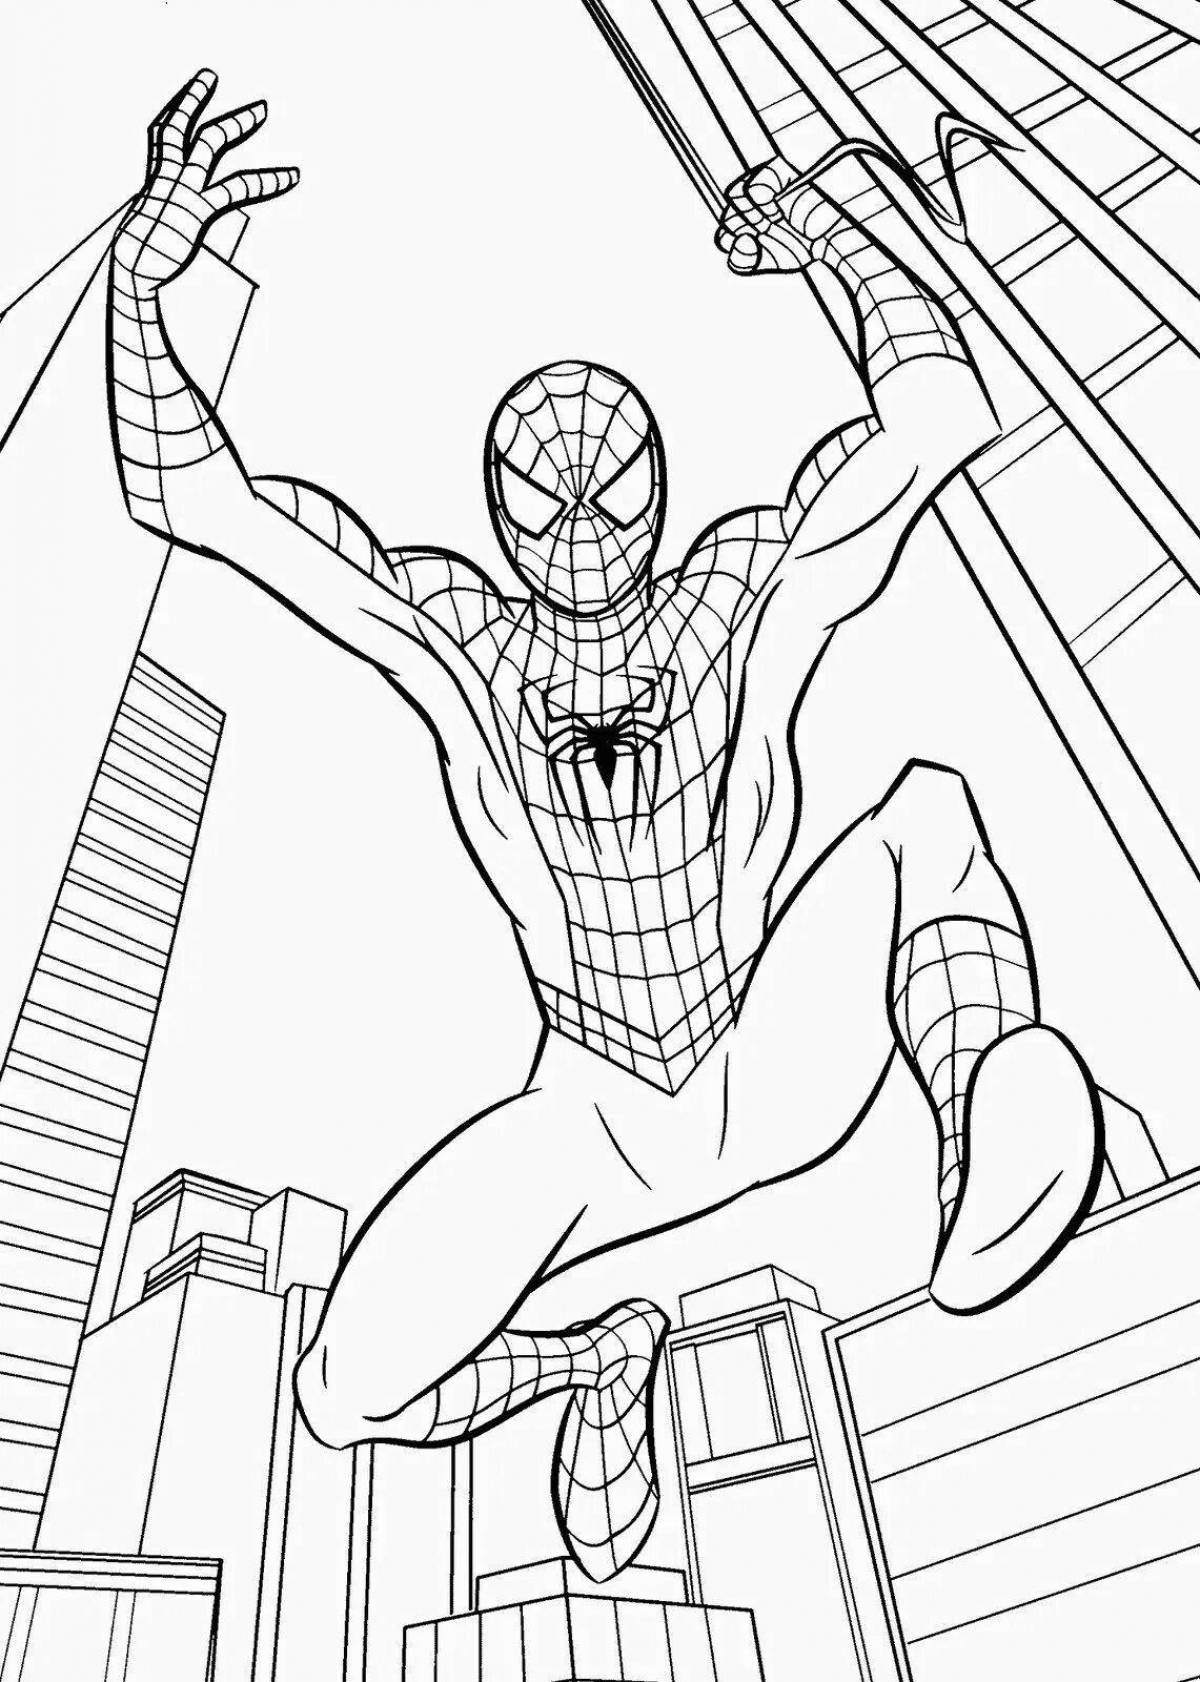 Spiderman freaky team coloring page